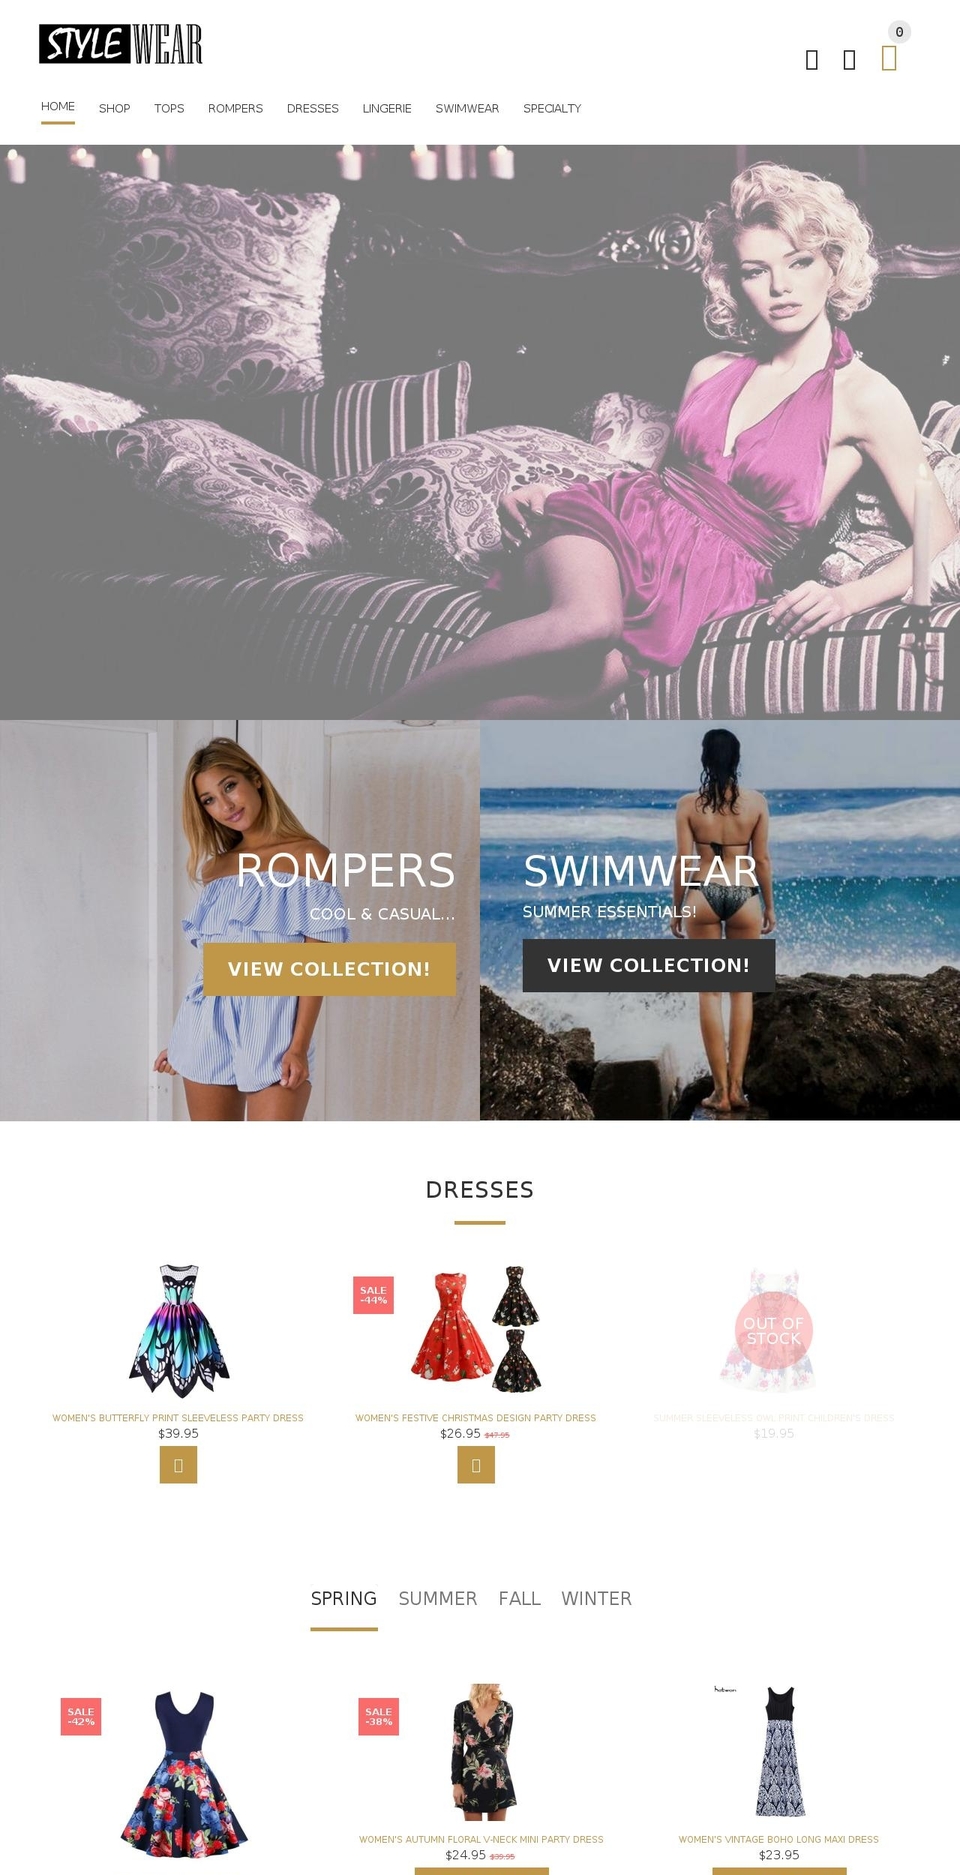 install-me-yourstore-v2-1-9 Shopify theme site example stylewear.net